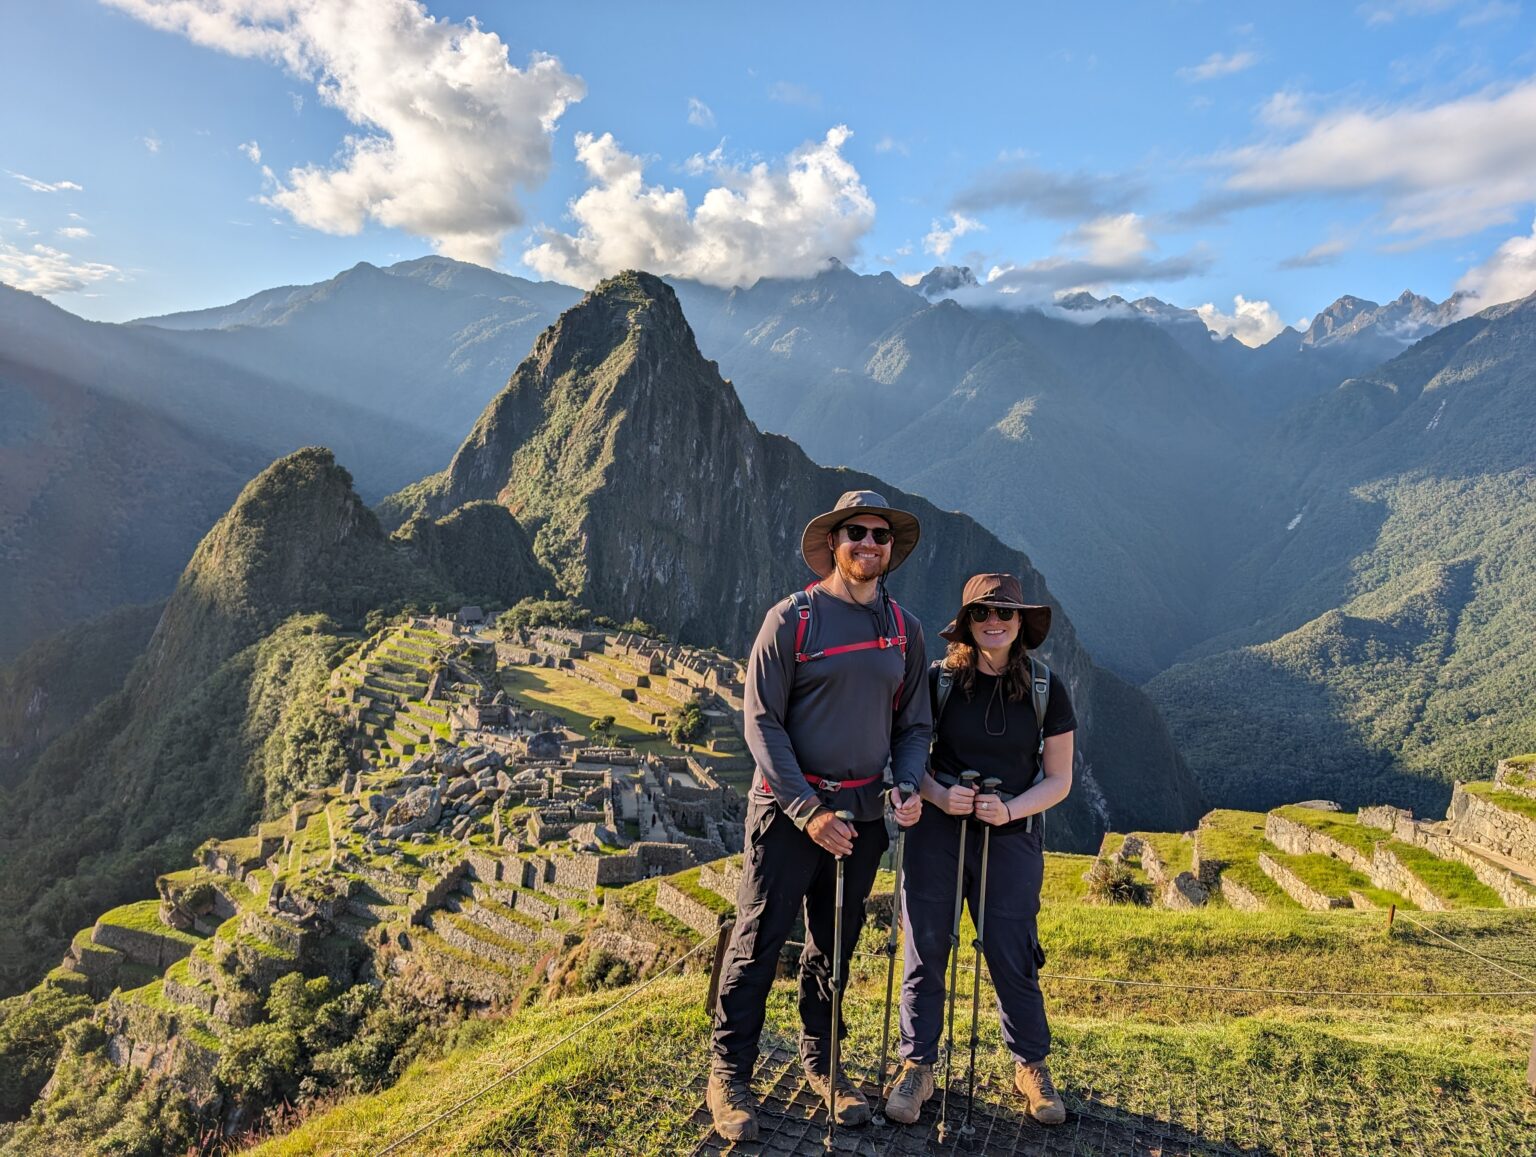 Two people standing in their hiking gear in front of Machu Picchu